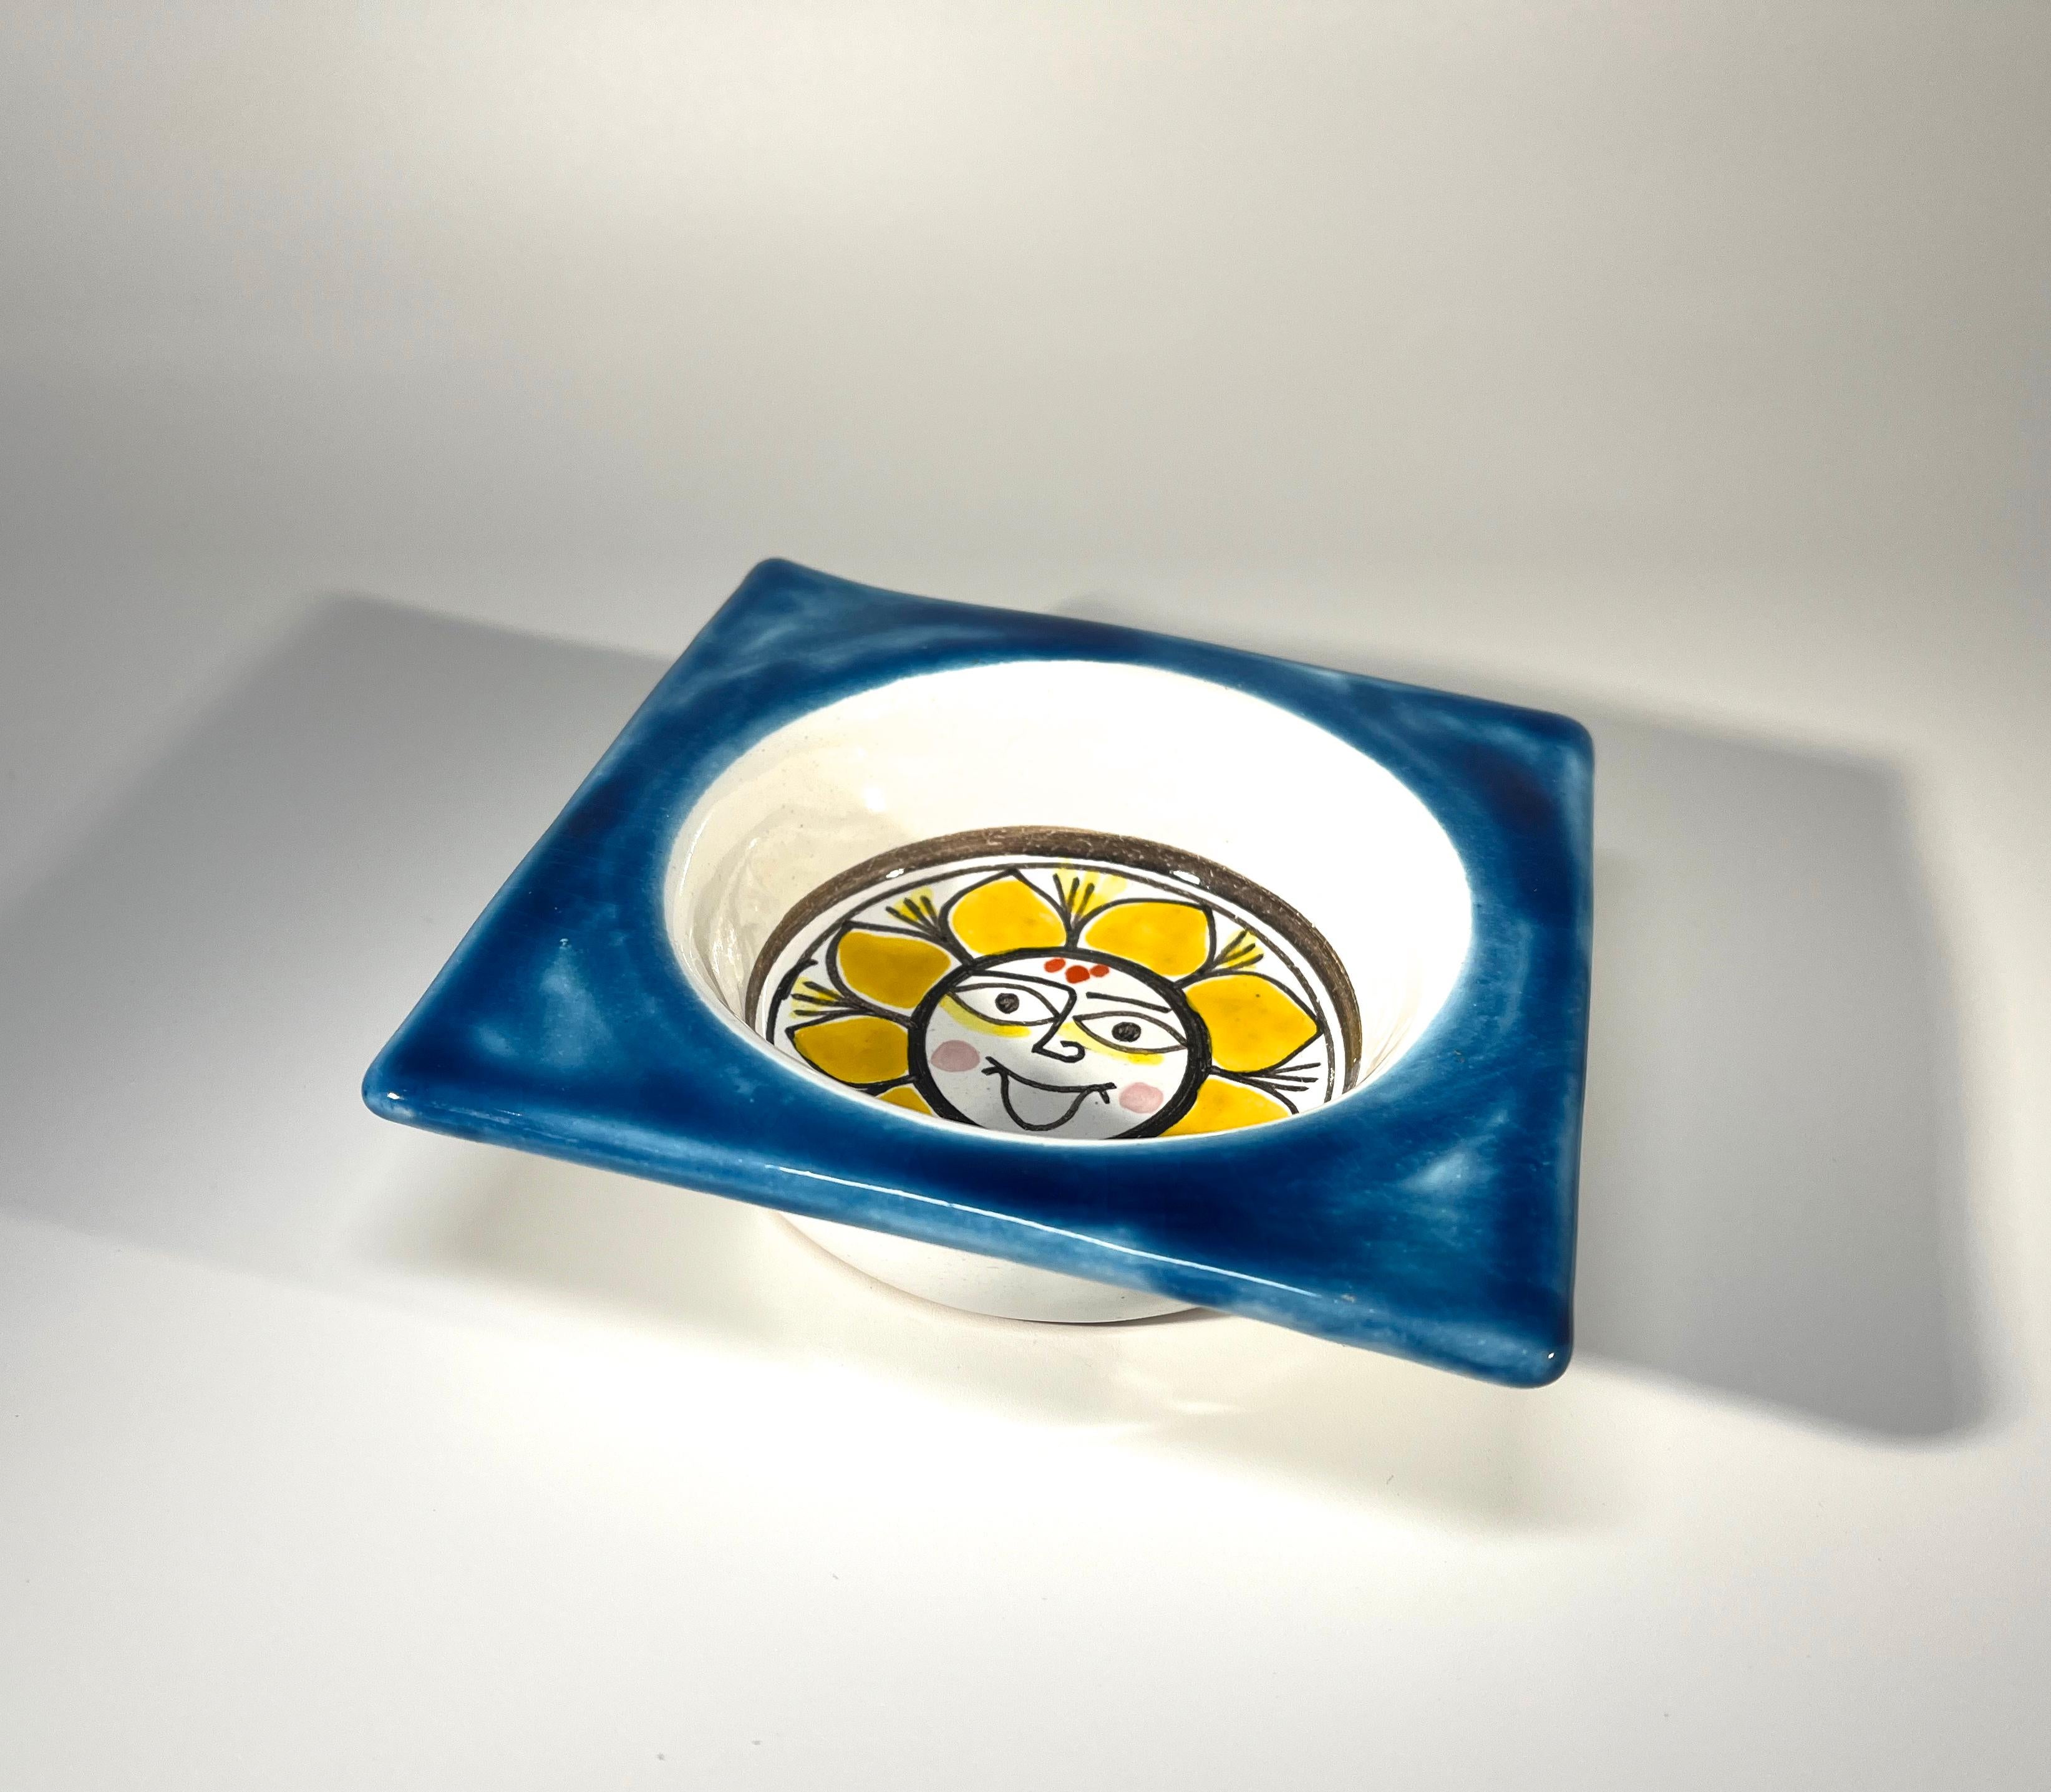 DeSimone of Italy, 'Sunny Sunflower'  is typical of DeSimone's colourful and playful art.
Hand painted yellow sunflower motif to centre with a bright blue rim
This small bowl is weighty and almost square -  a super little piece for the DeSimone